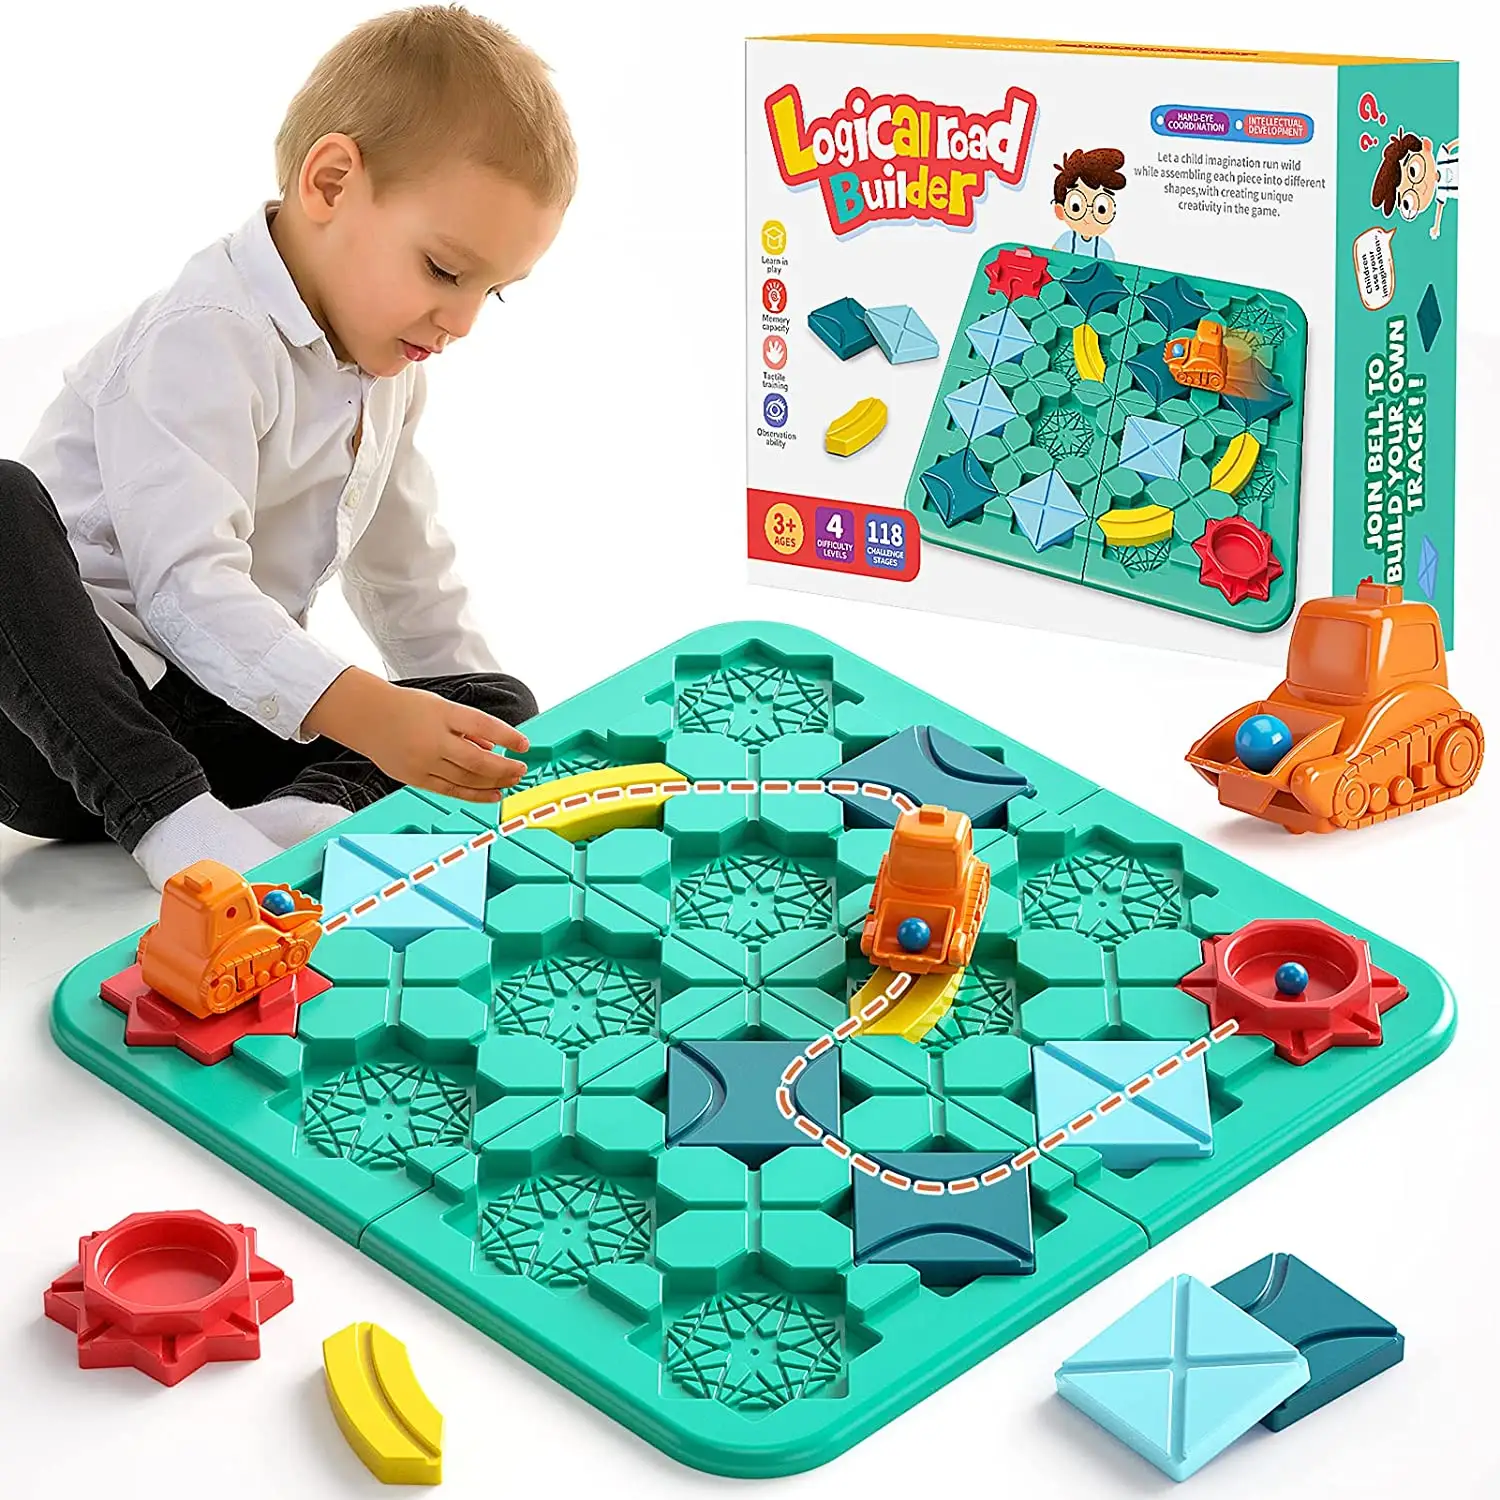 Hot Selling Kids Toys Educational Toys Logical Road Builder Maze Game Road Building Game